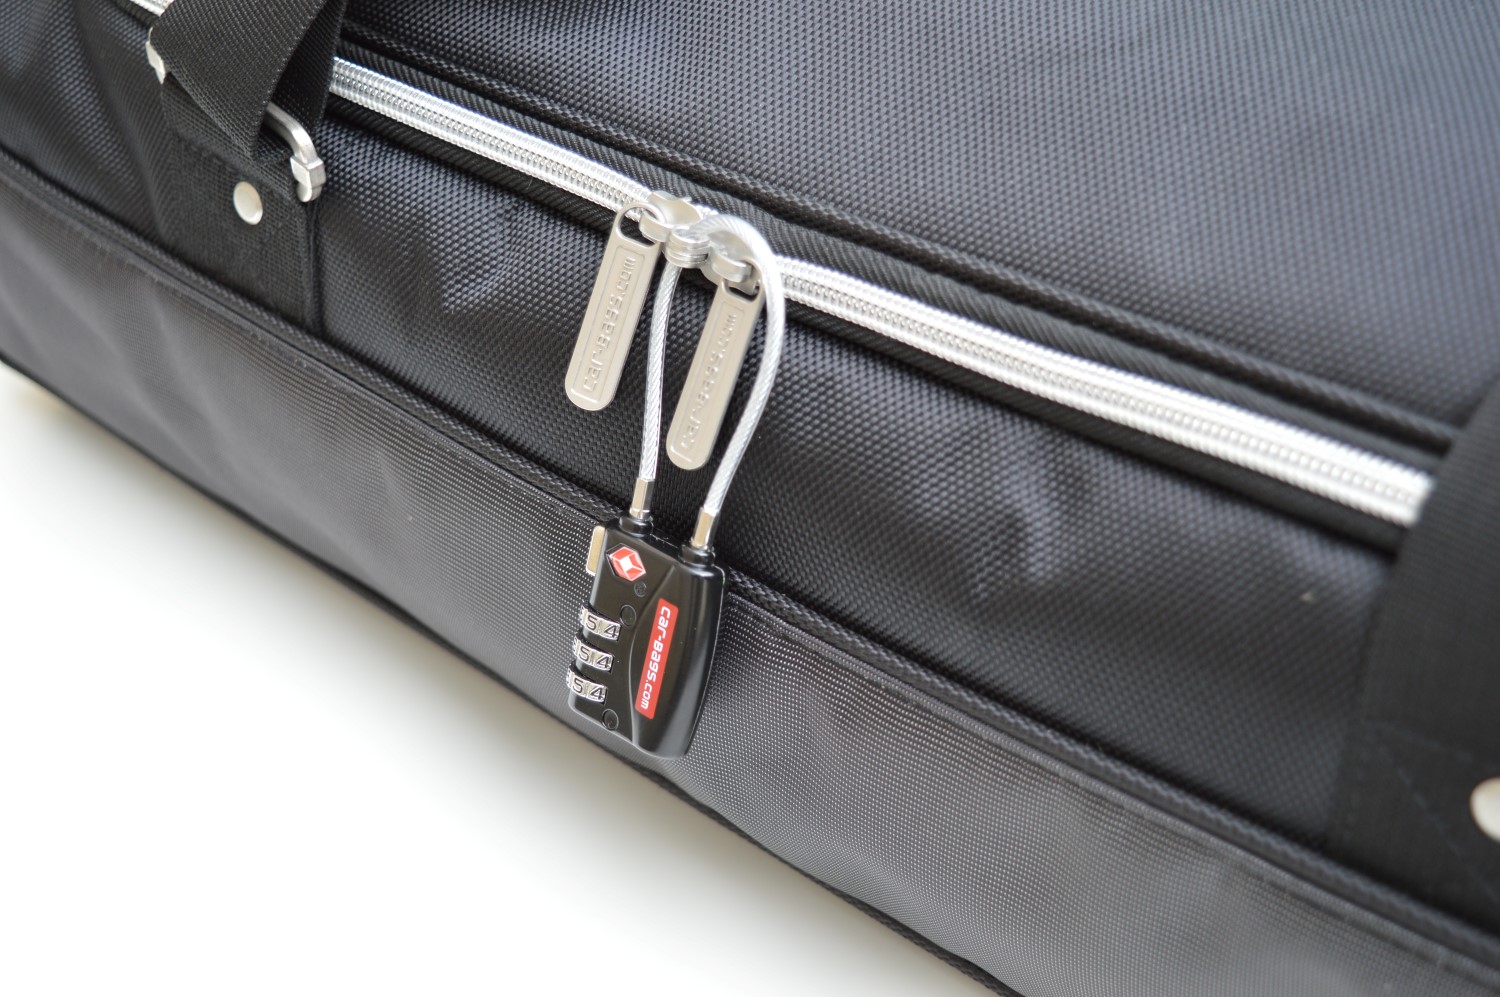 All Car-Bags zipper pullers are equipped with eyes